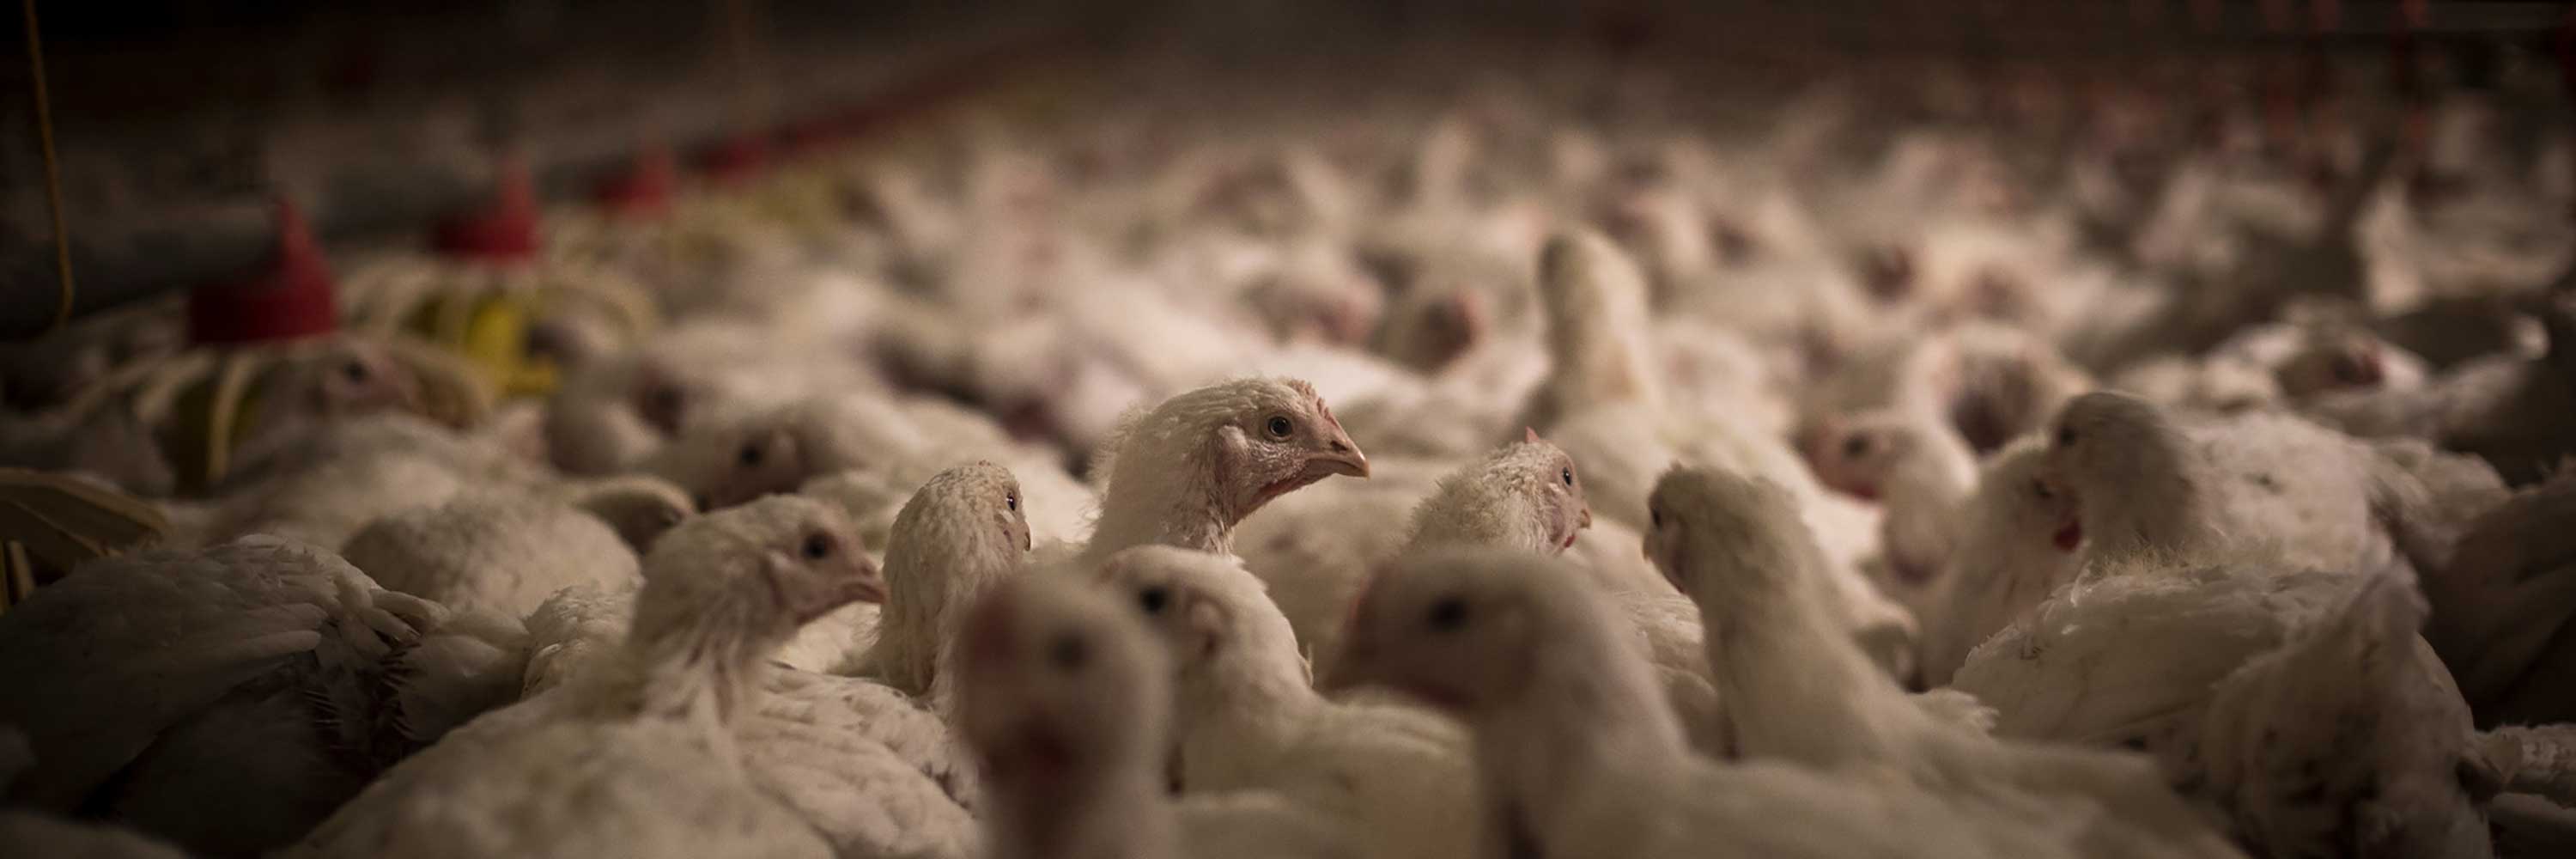 Chickens in a factory farm located in Spain